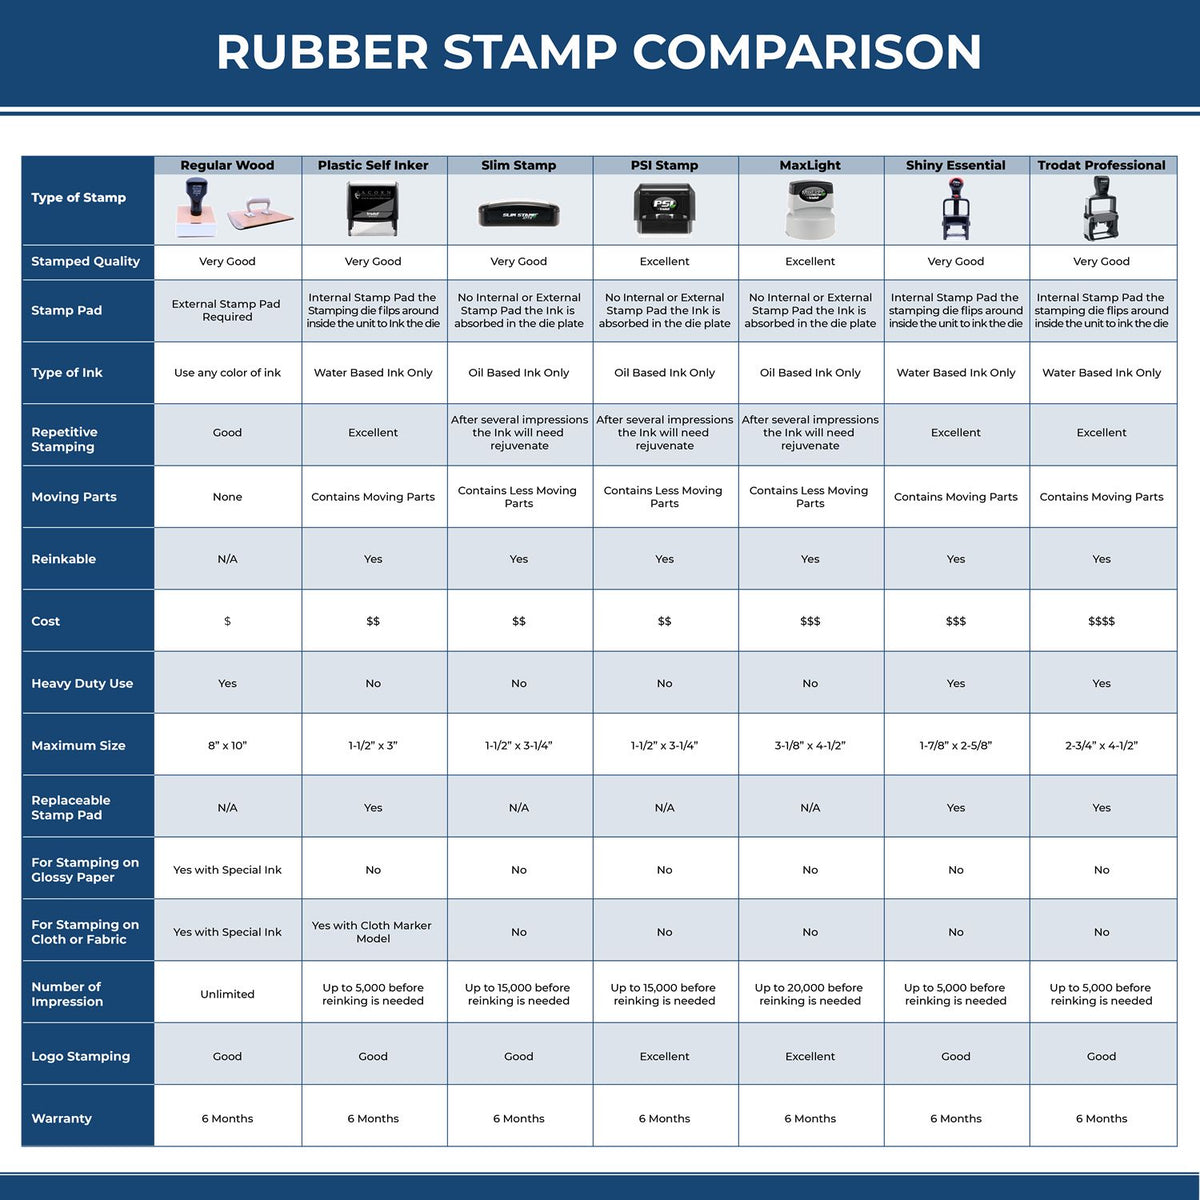 A comparison chart for the different types of mount models available for the Self-Inking Idaho PE Stamp.